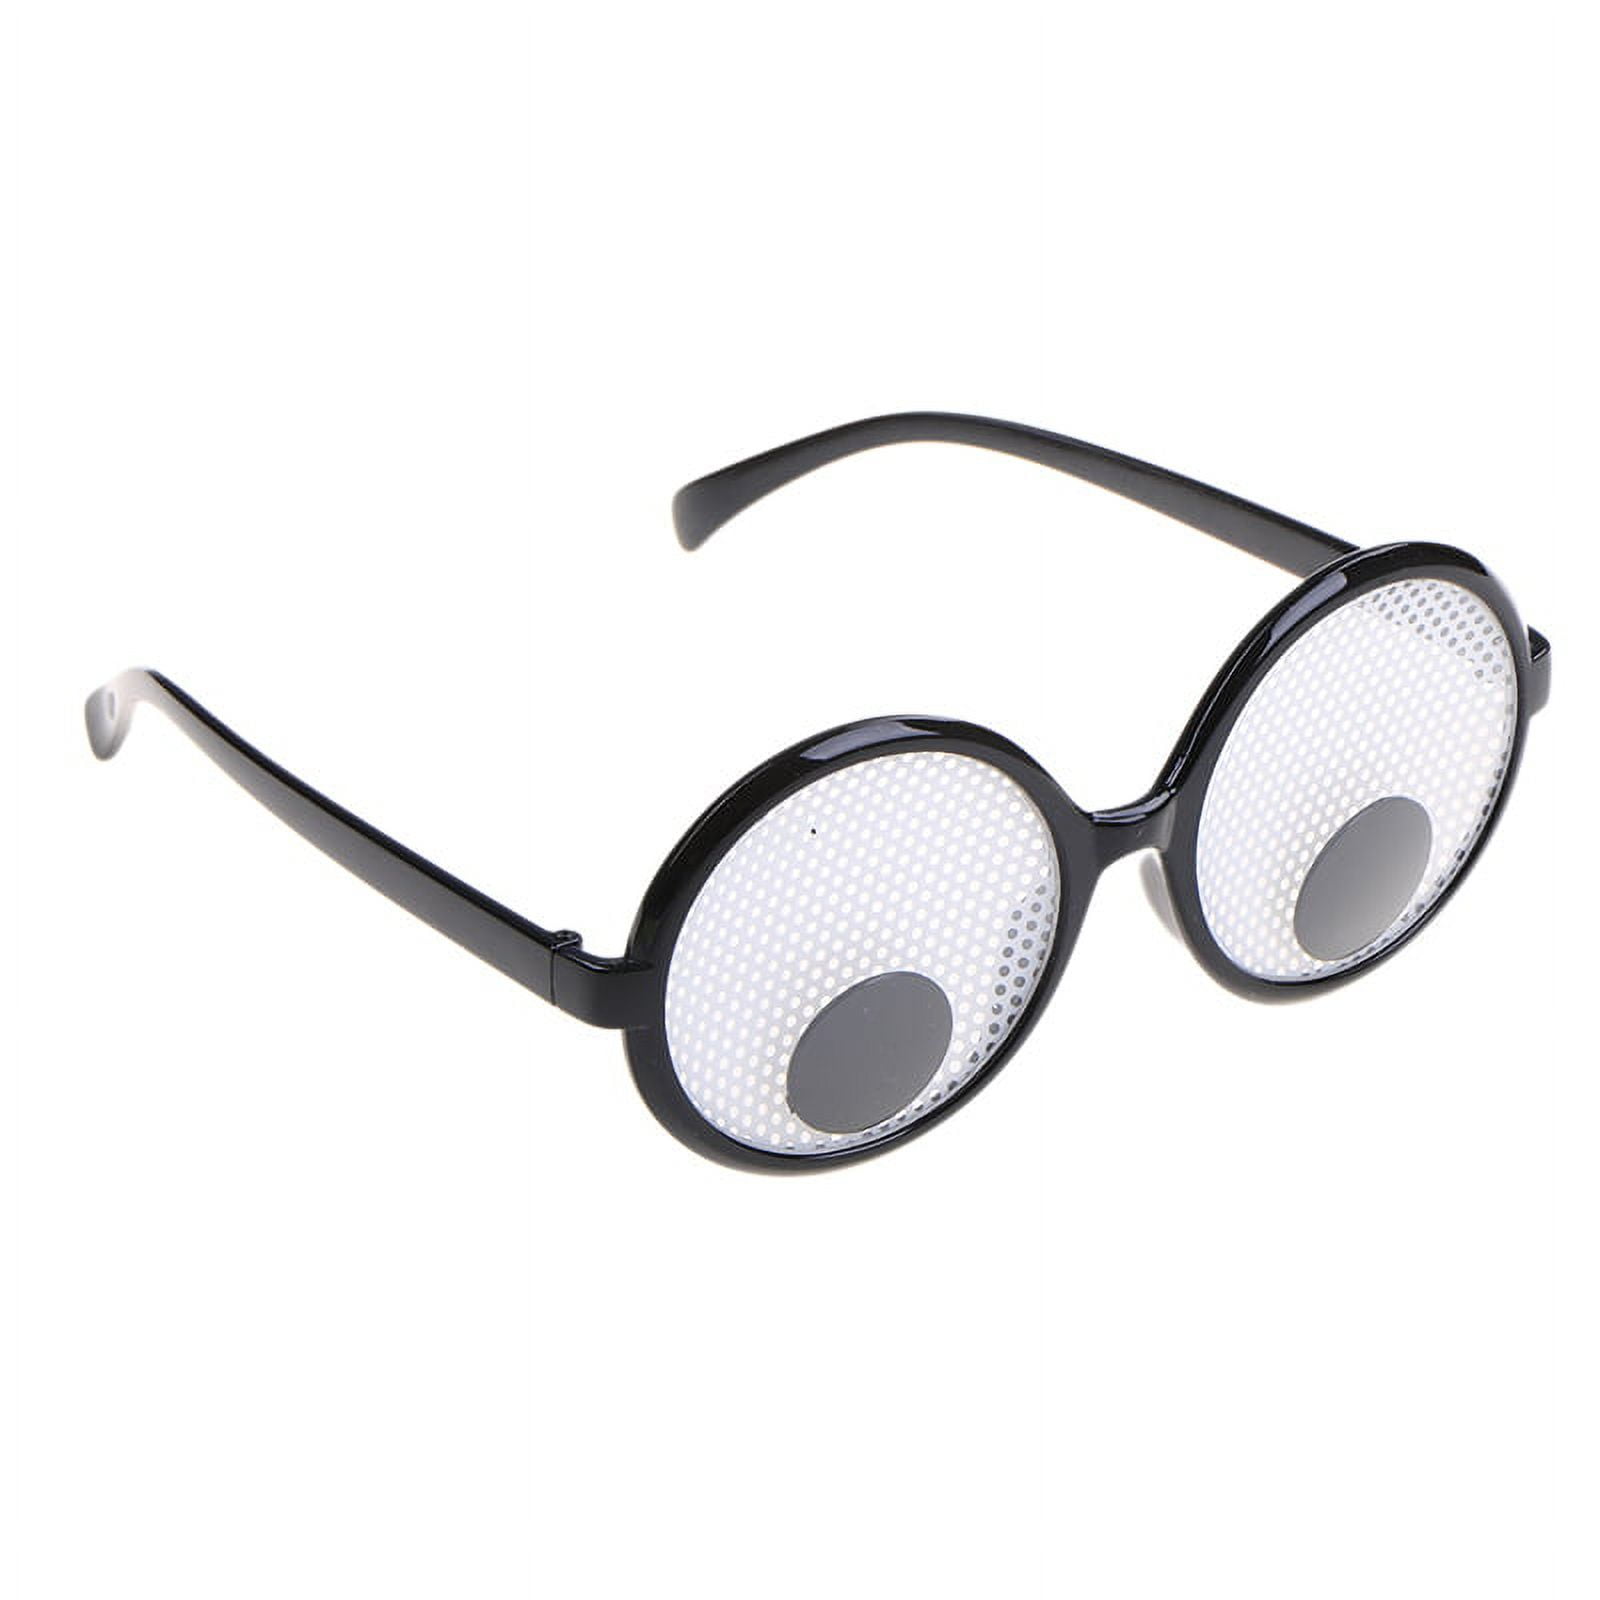 Funny Googly Eyes Goggles Shaking Eyes Party Glasses Toys for